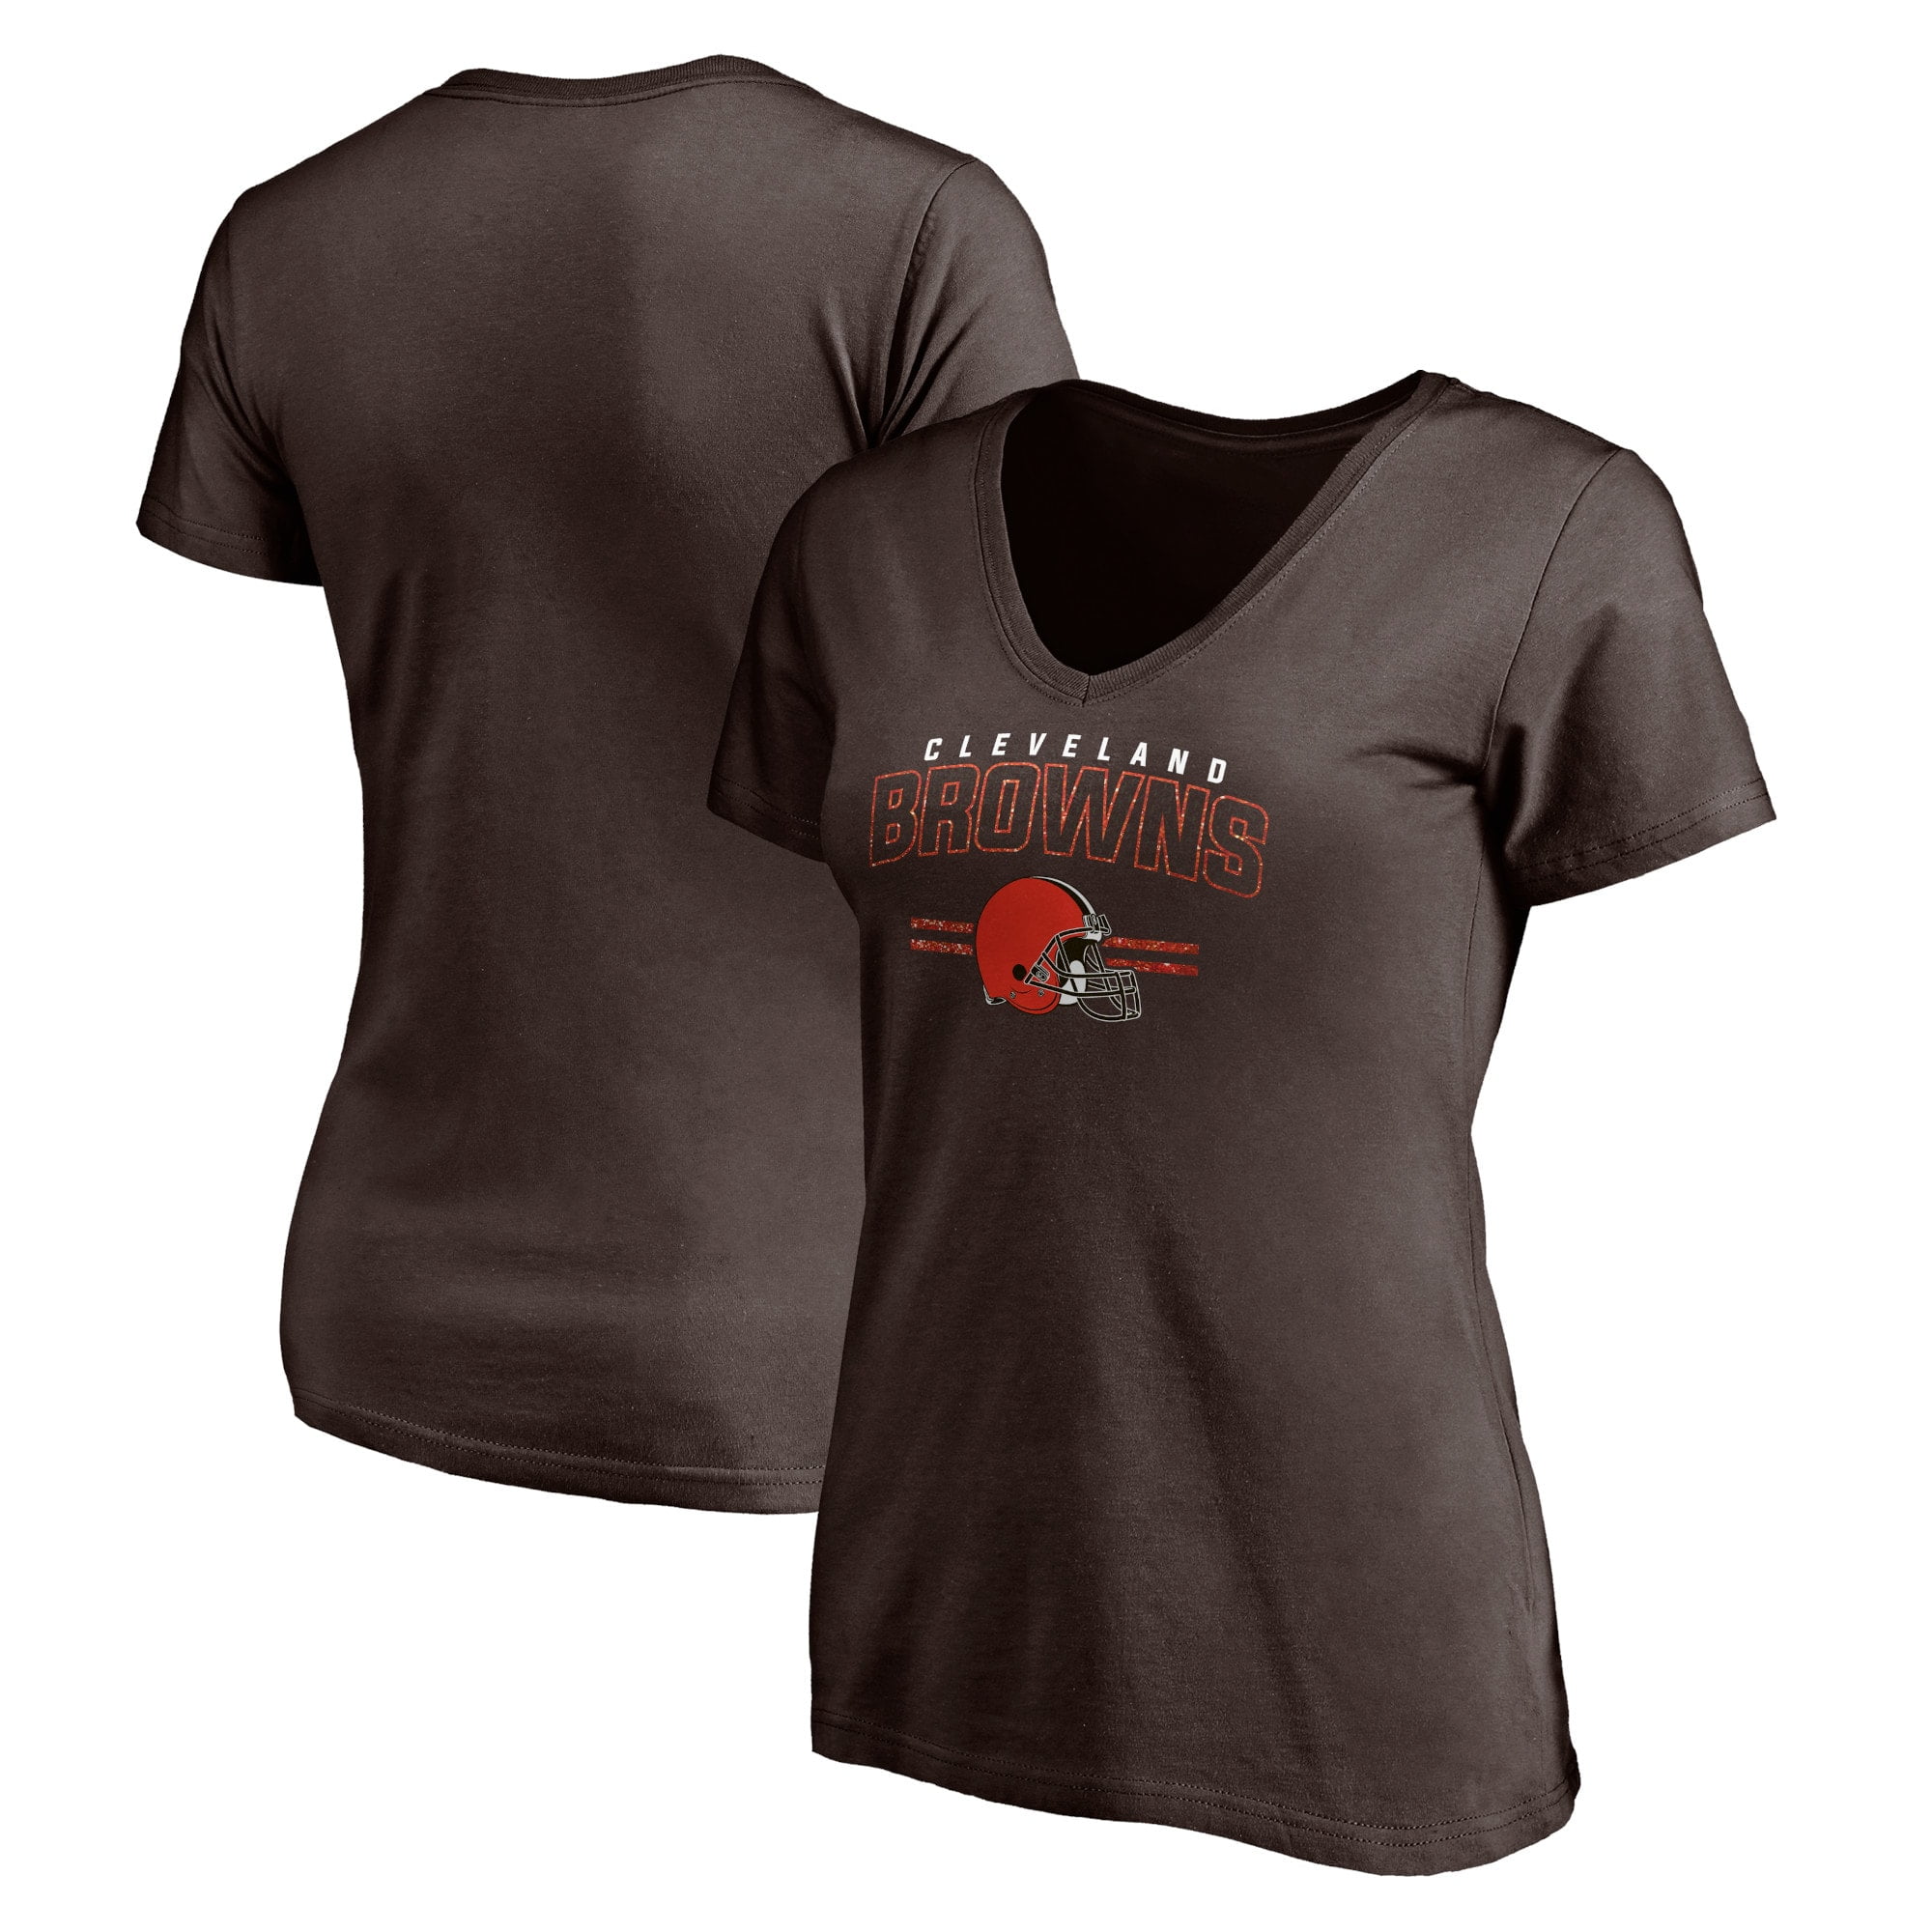 Ladies Cleveland Browns T-Shirts, Browns T-Shirts